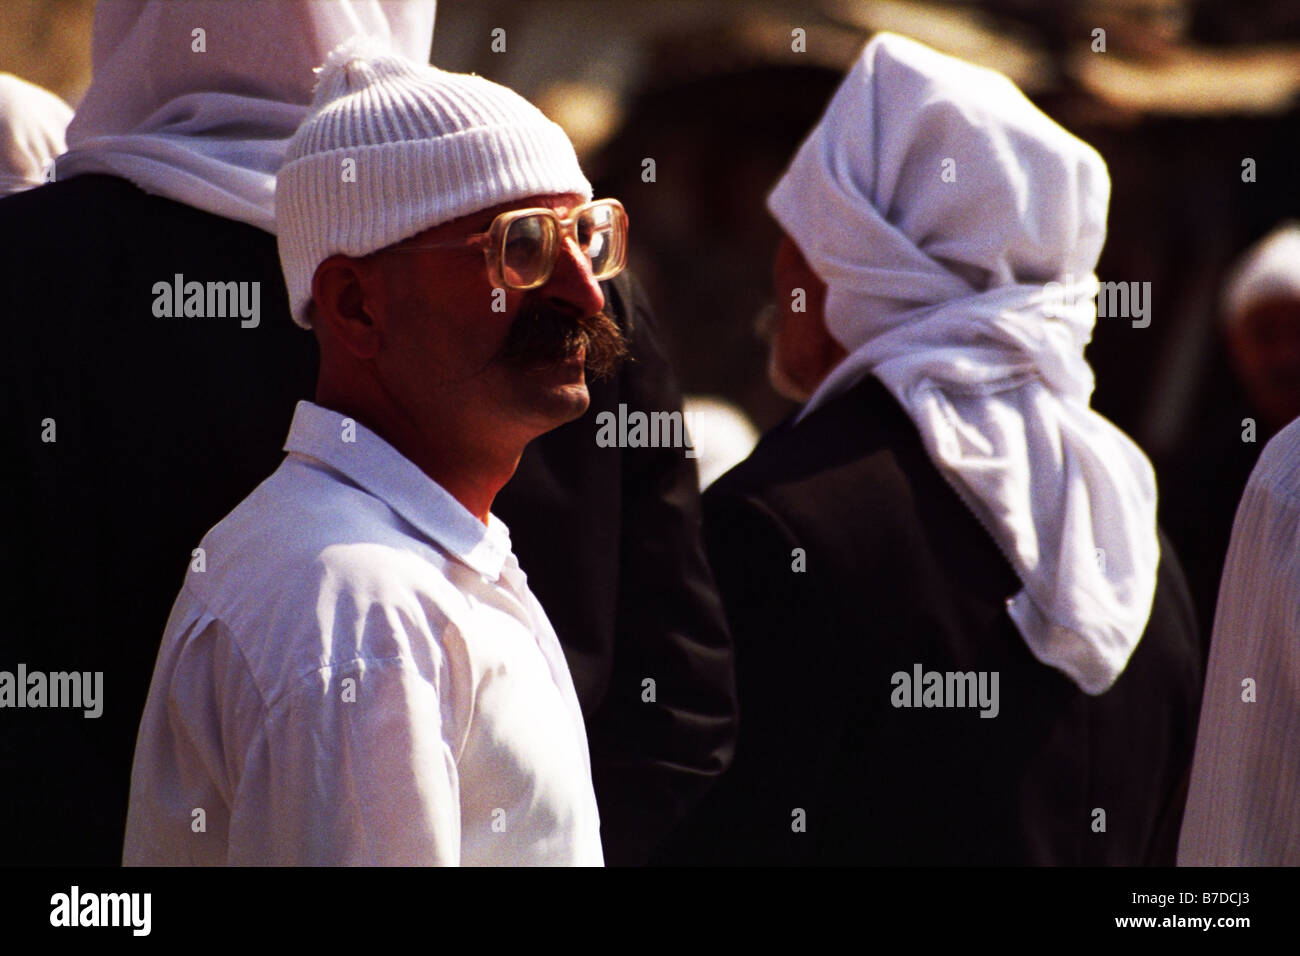 Druze men wearing their traditional head covers. Stock Photo